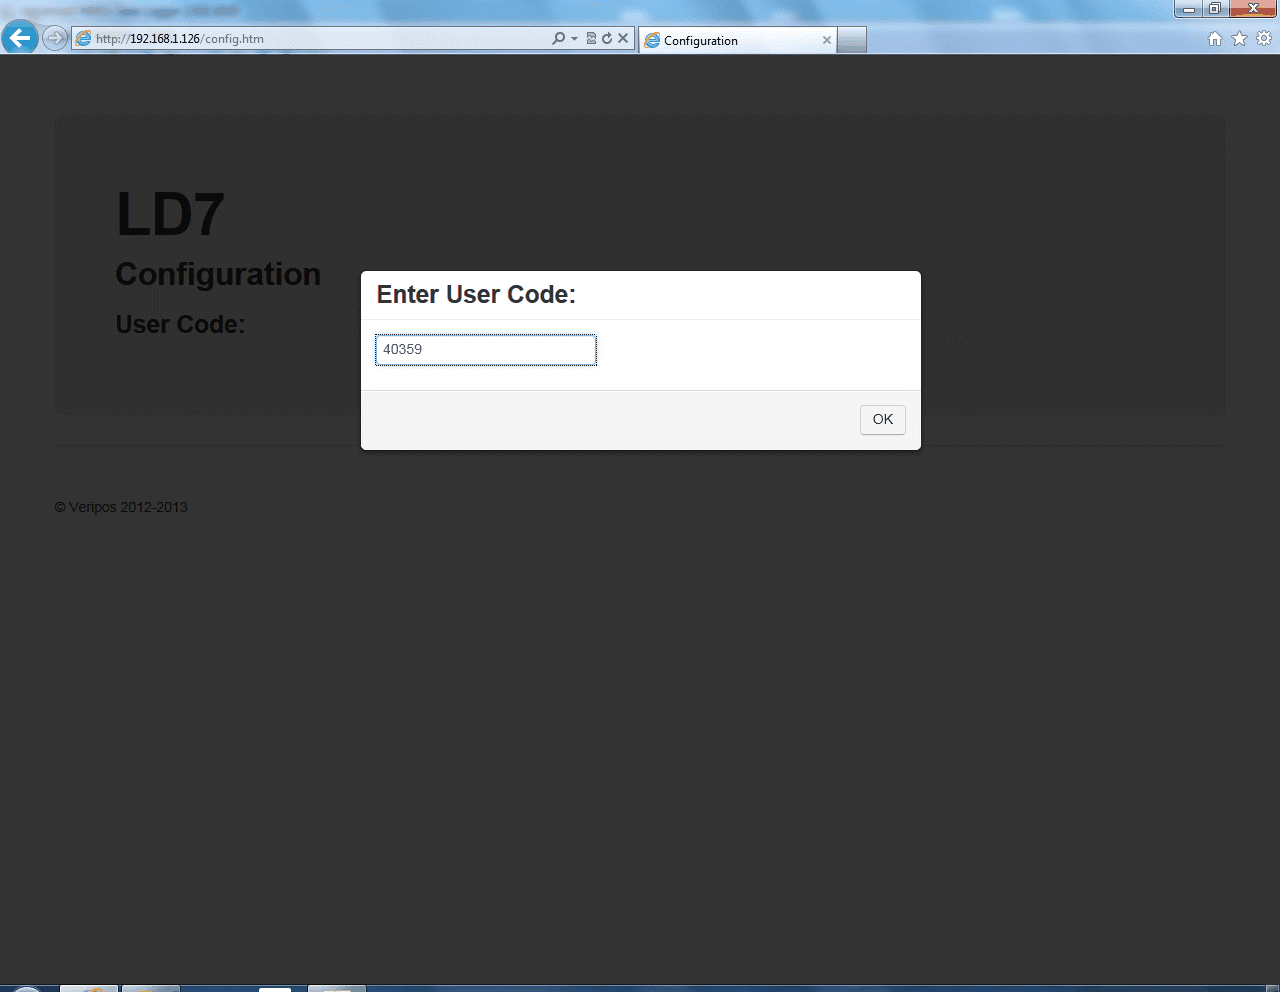 Enter the LD7 User Code from the front of the unit and click OK: